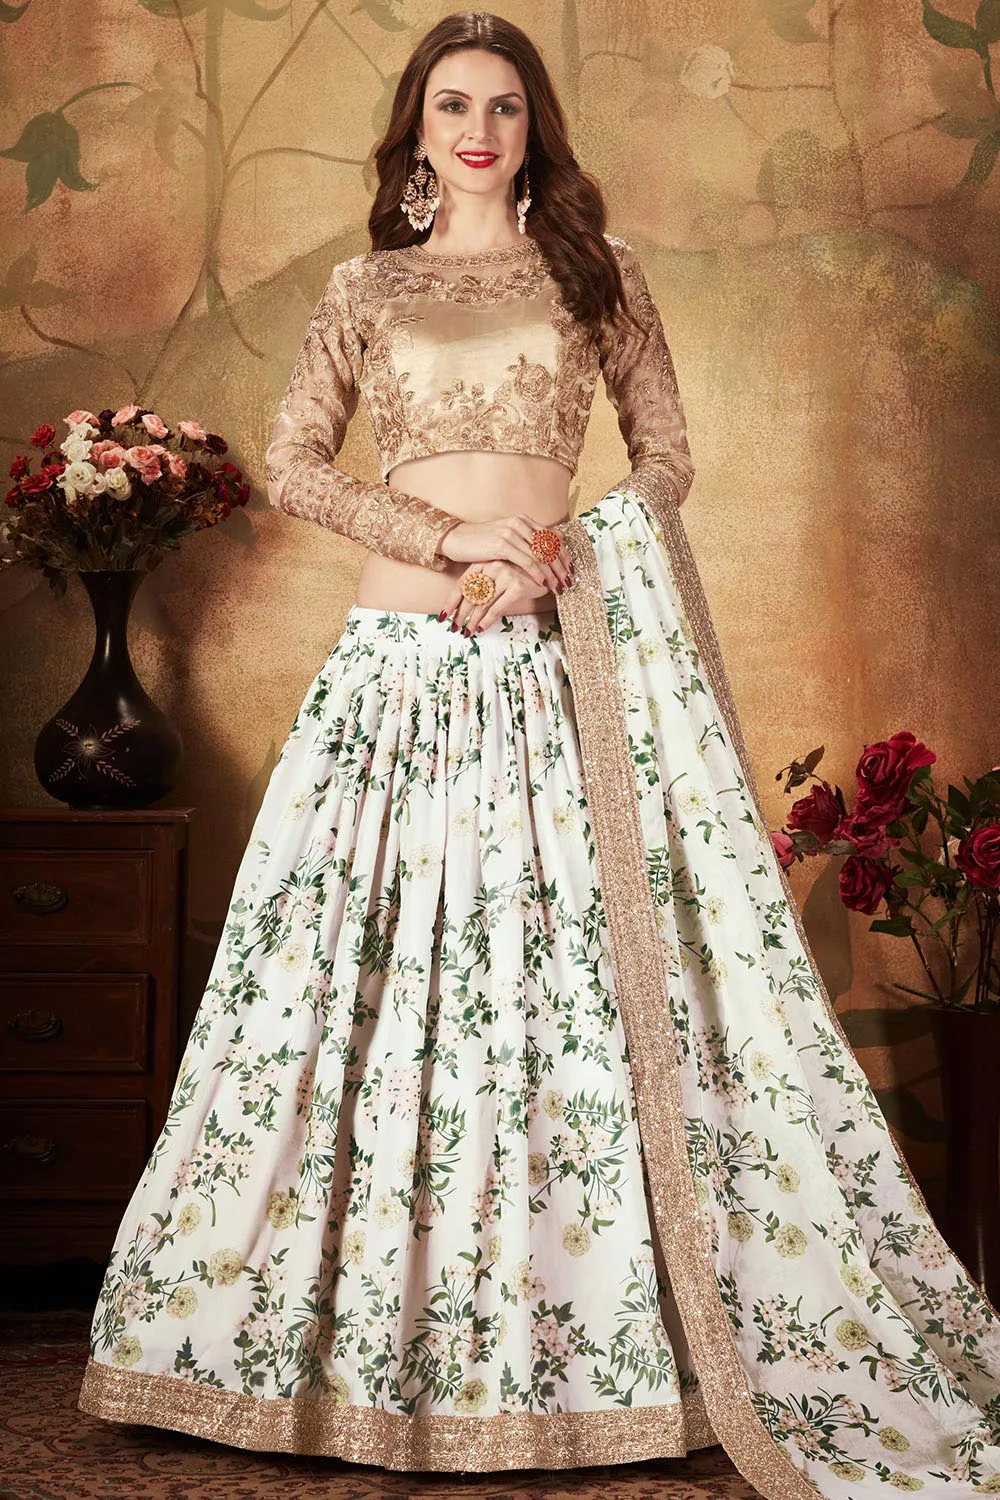 Off-White and Beige Organza Floral Lehenga Choli Set with Elegant Embroidery Work